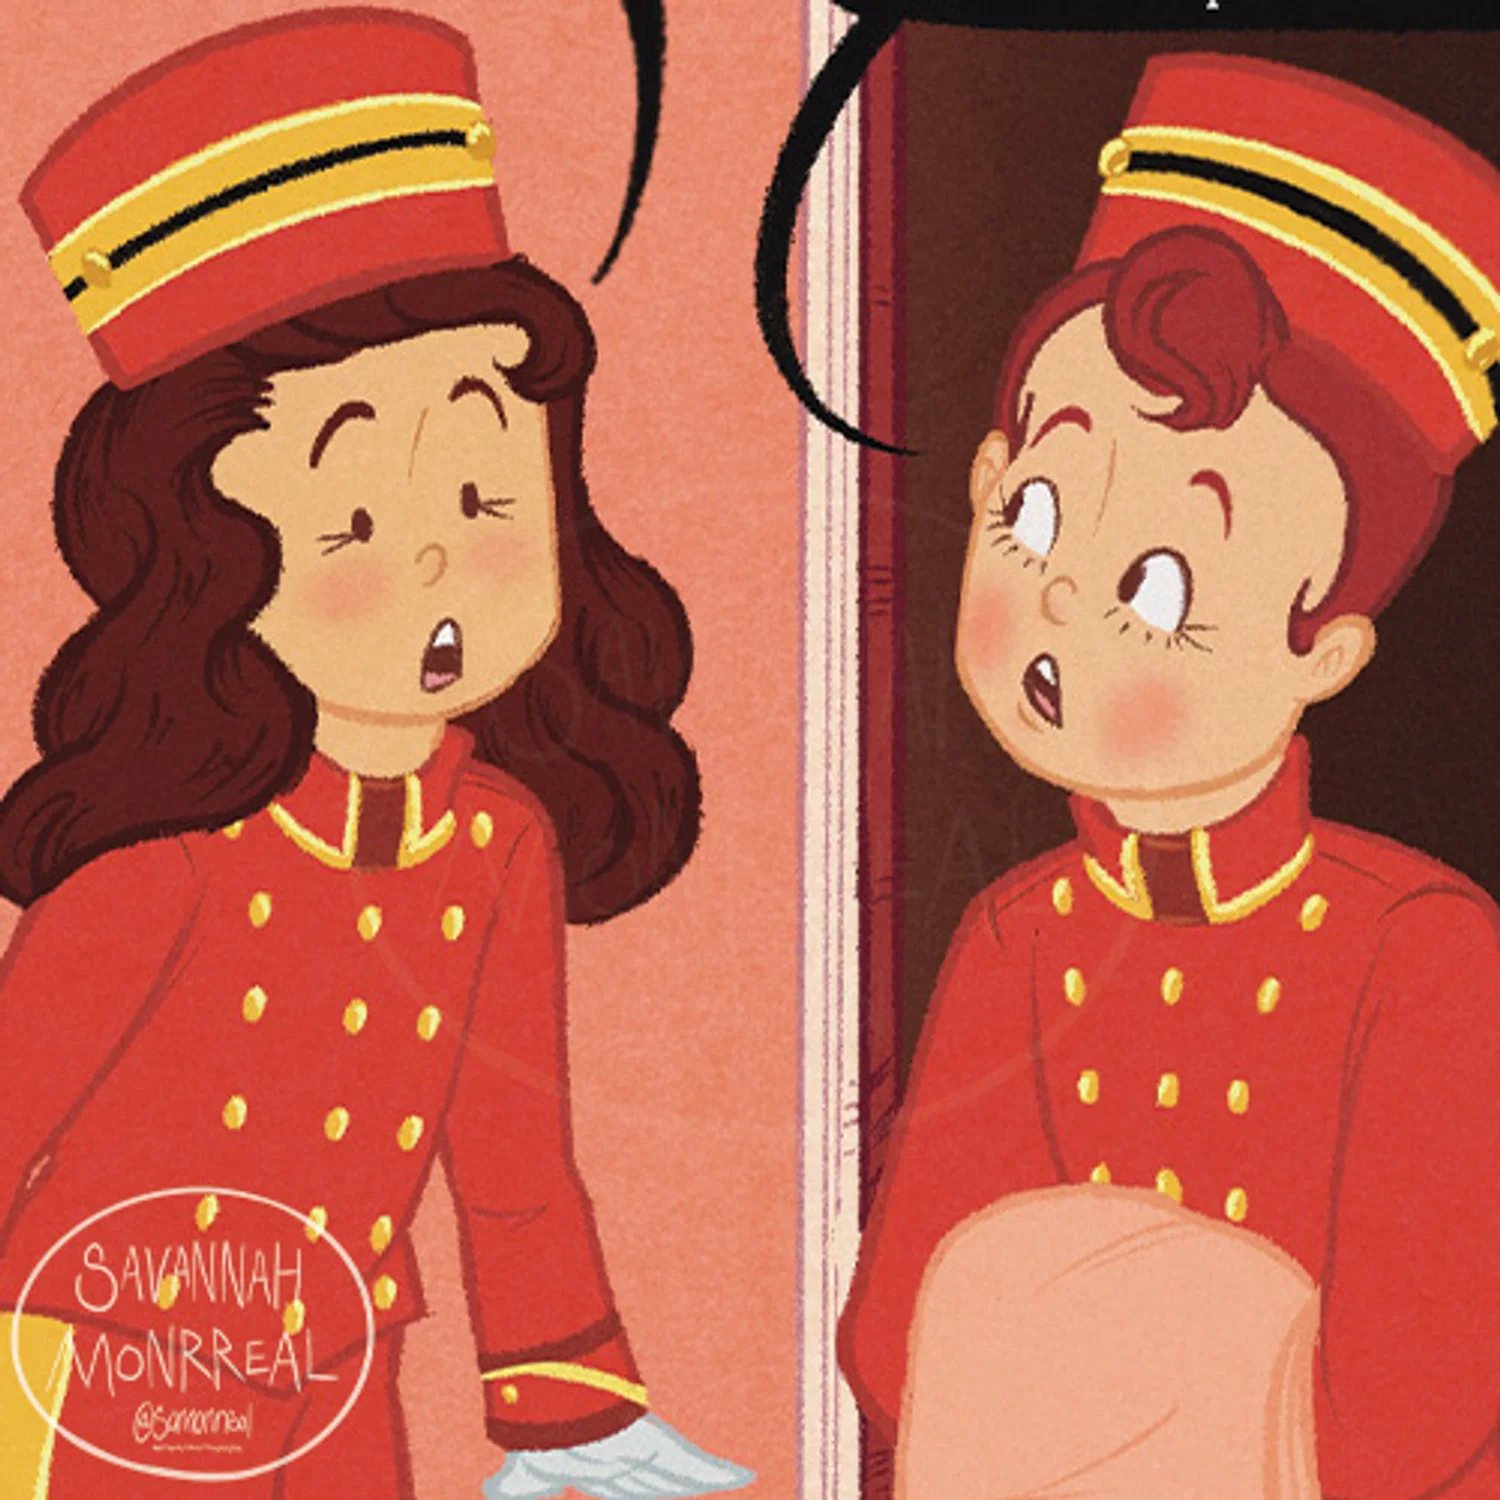 Two bellhops in identical red uniforms with three rows of buttons talking with each other. The left bellhop has long brown hair and the one on the right has red-brown hair with a curl on his forehead. The bellhop on the right is holding a pink-beige blanket in his arms. There is a watermark in the corner that says "Savannah Monrreal @samonrreal"